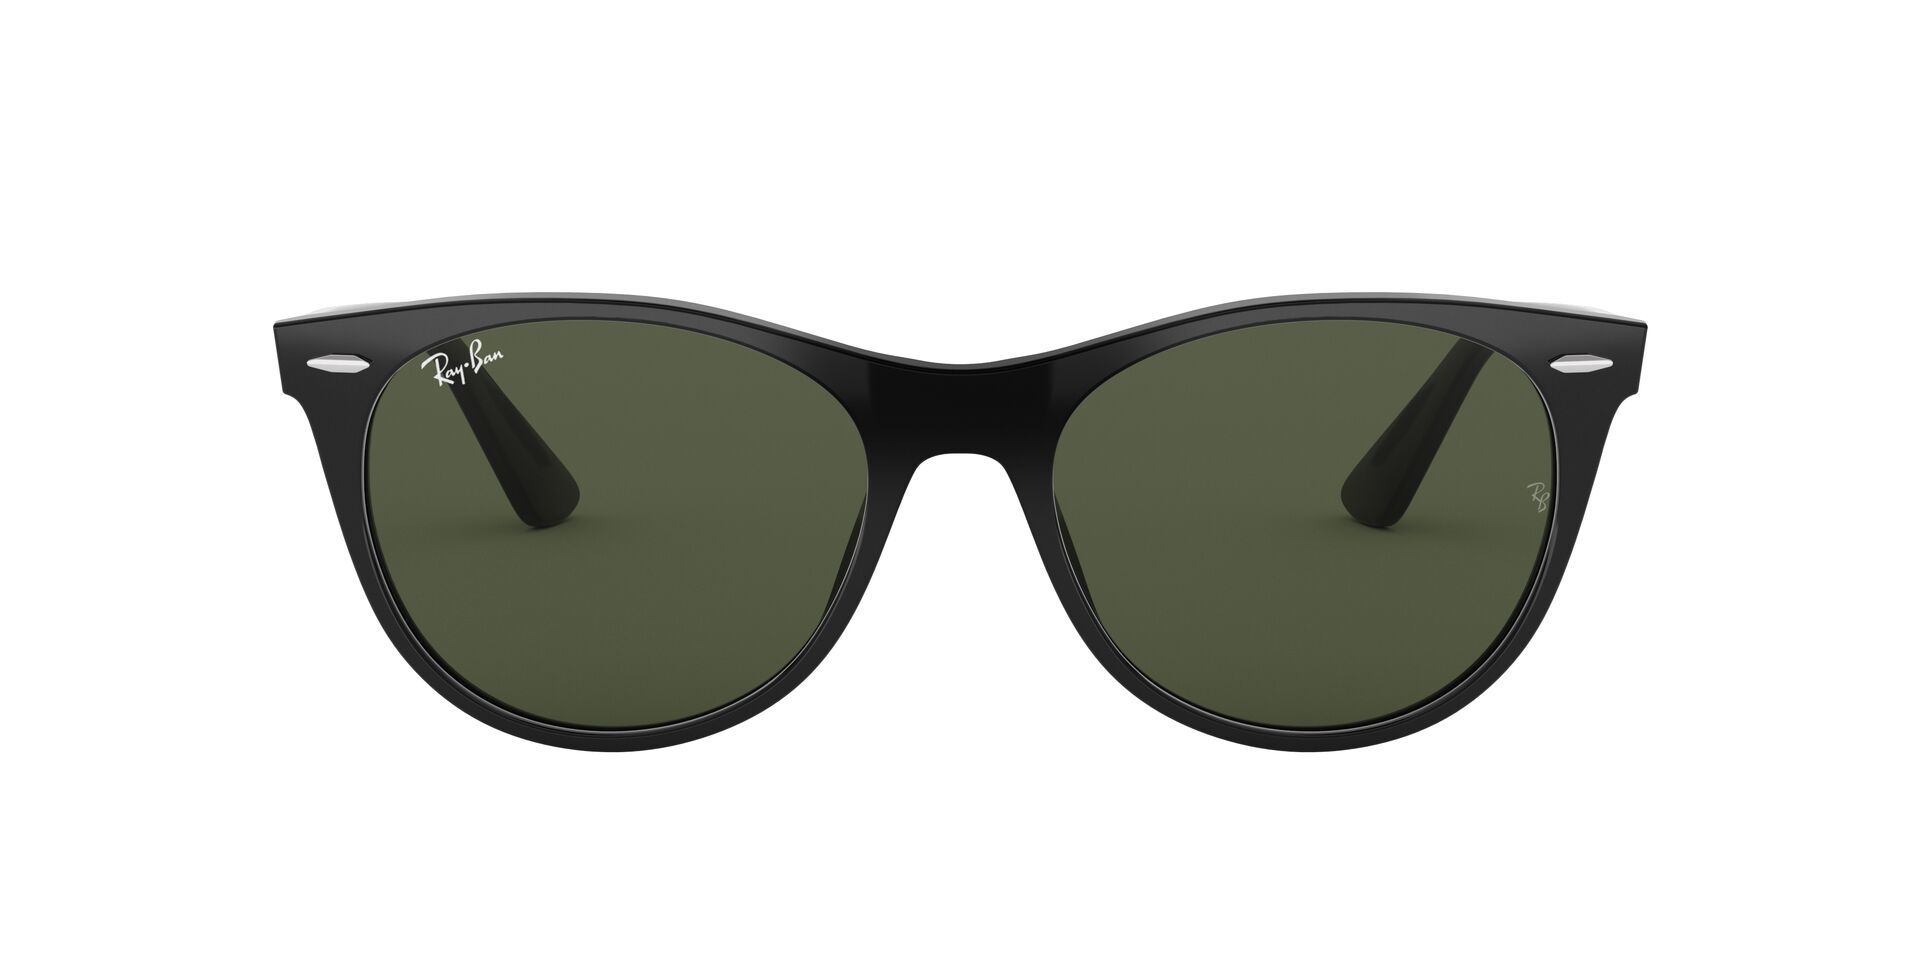 Ray-Ban 0RB2185 Bottle Green Icons Round Sunglasses (55 mm)